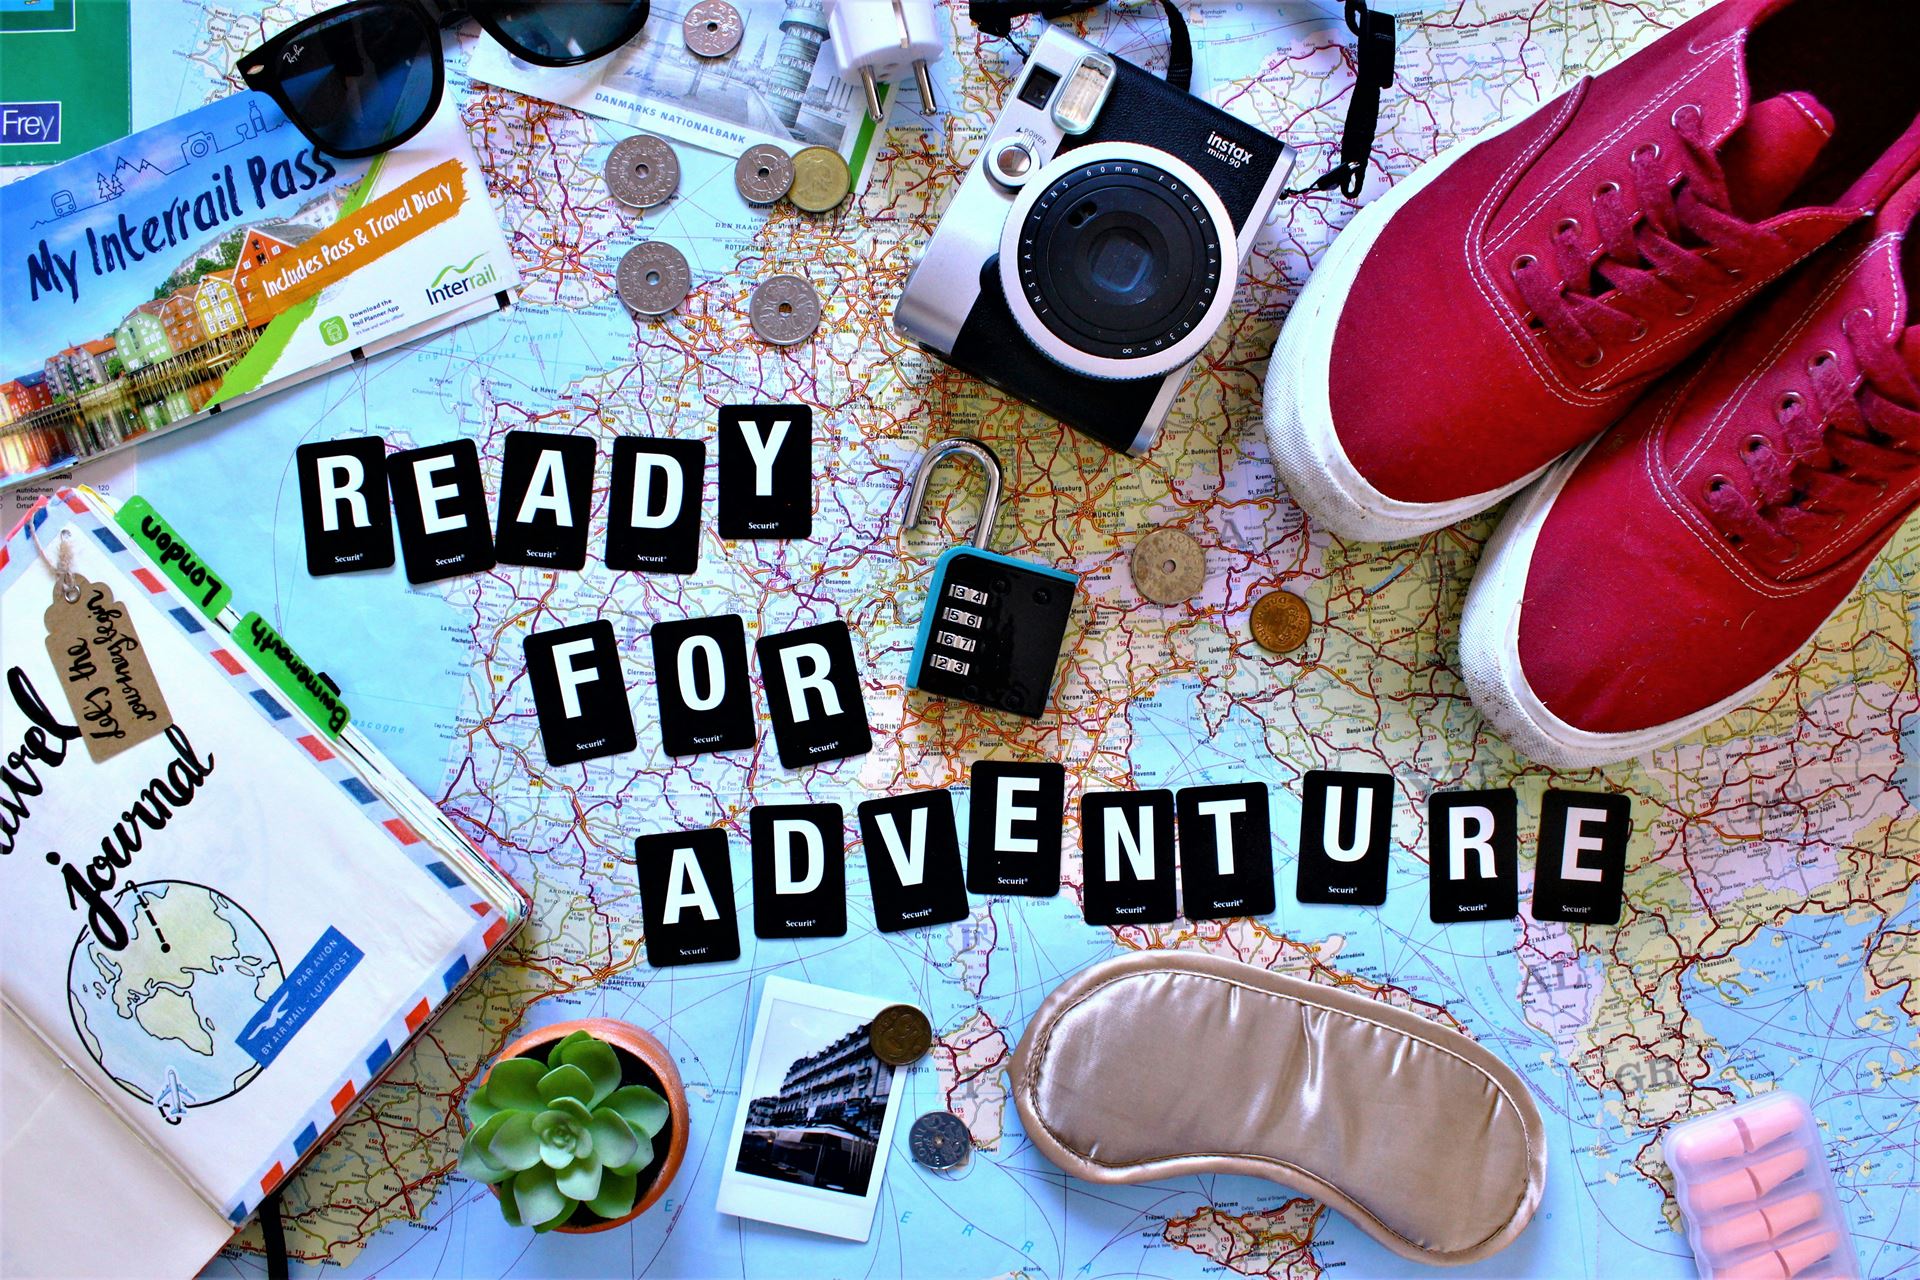 Ready for adventure (travelling)